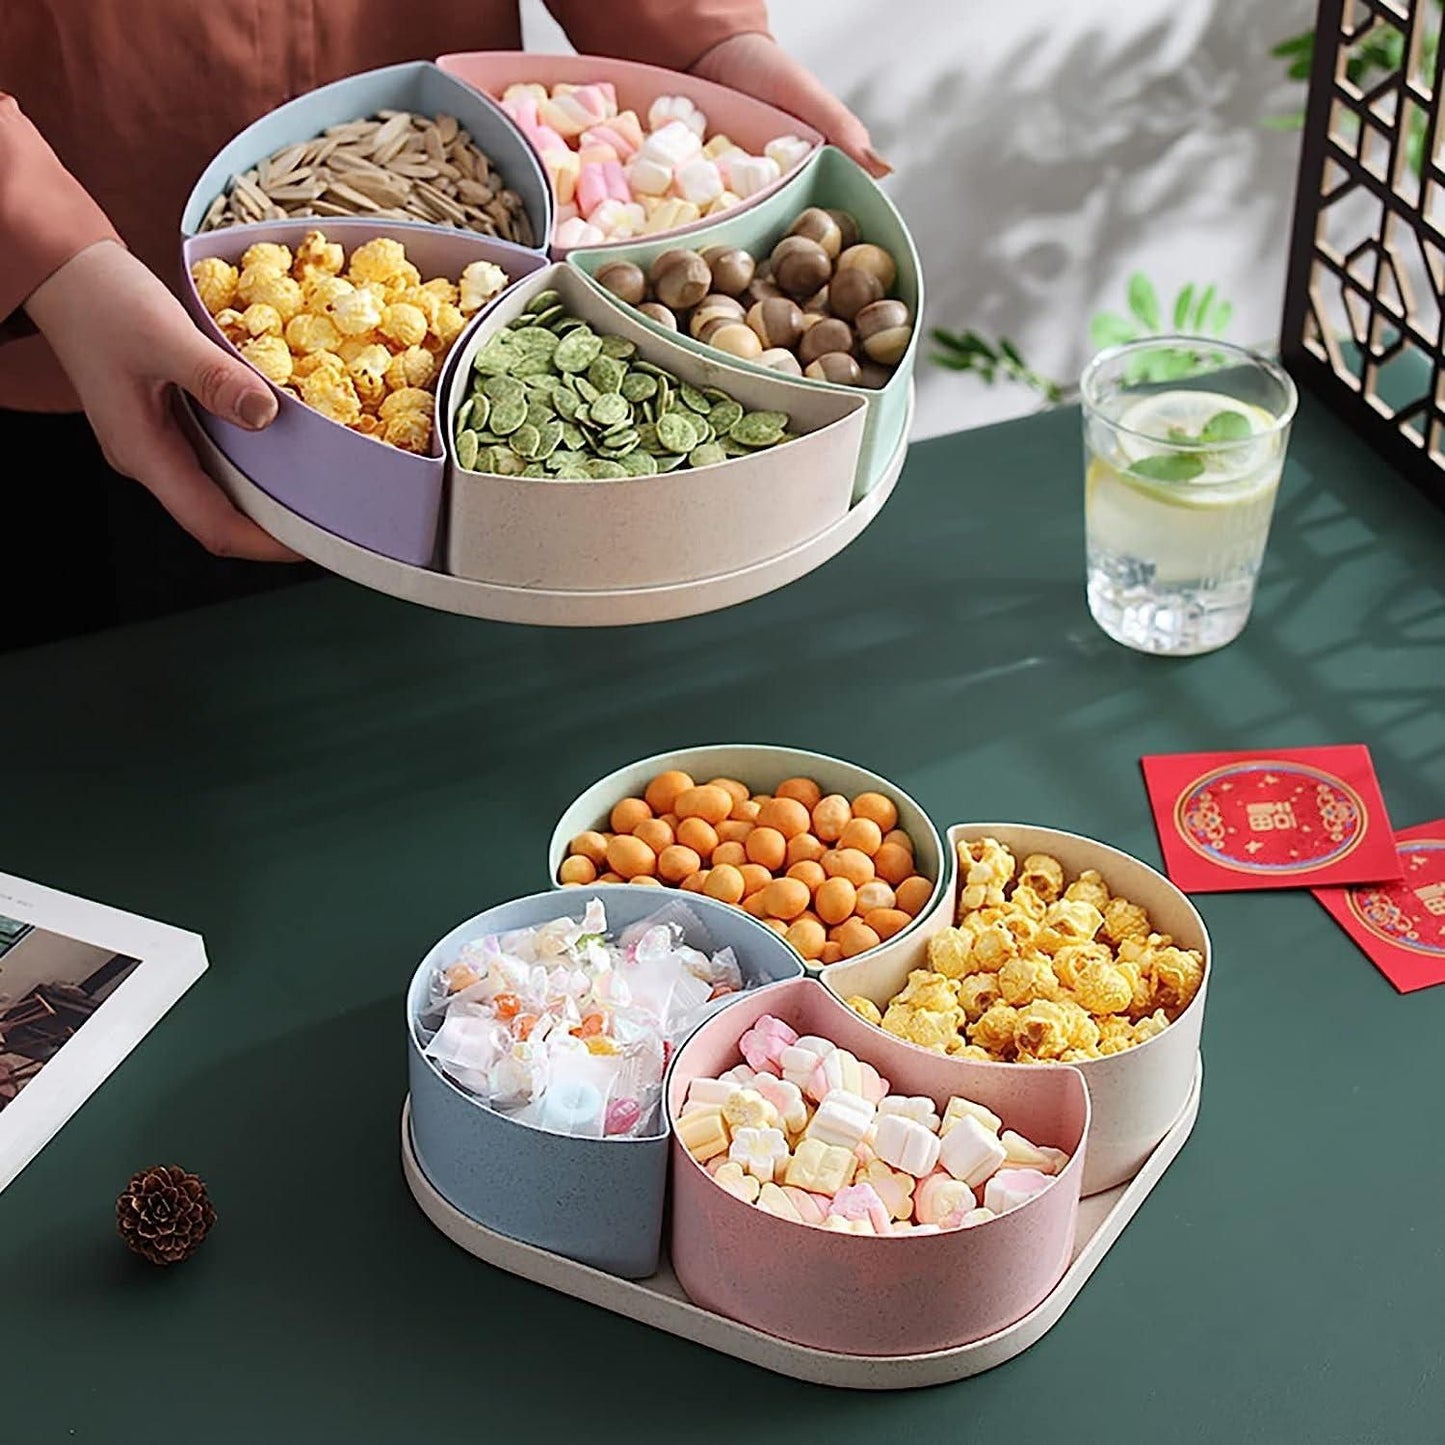 Multifunctional Serving Platters and Trays for Parties